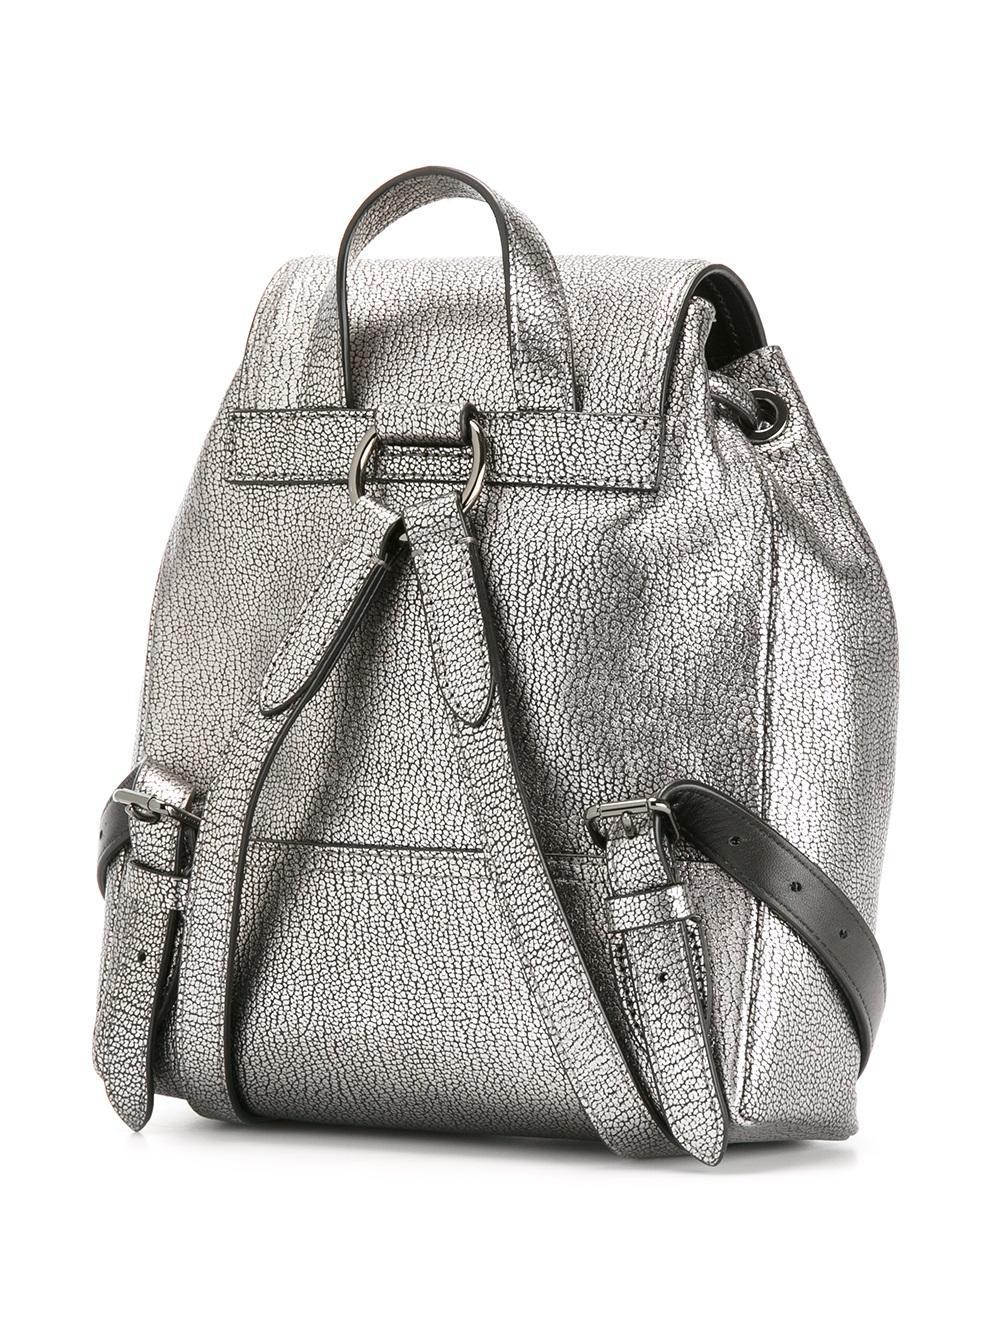 COACH Leather Metallic Drawstring Backpack in Black - Lyst